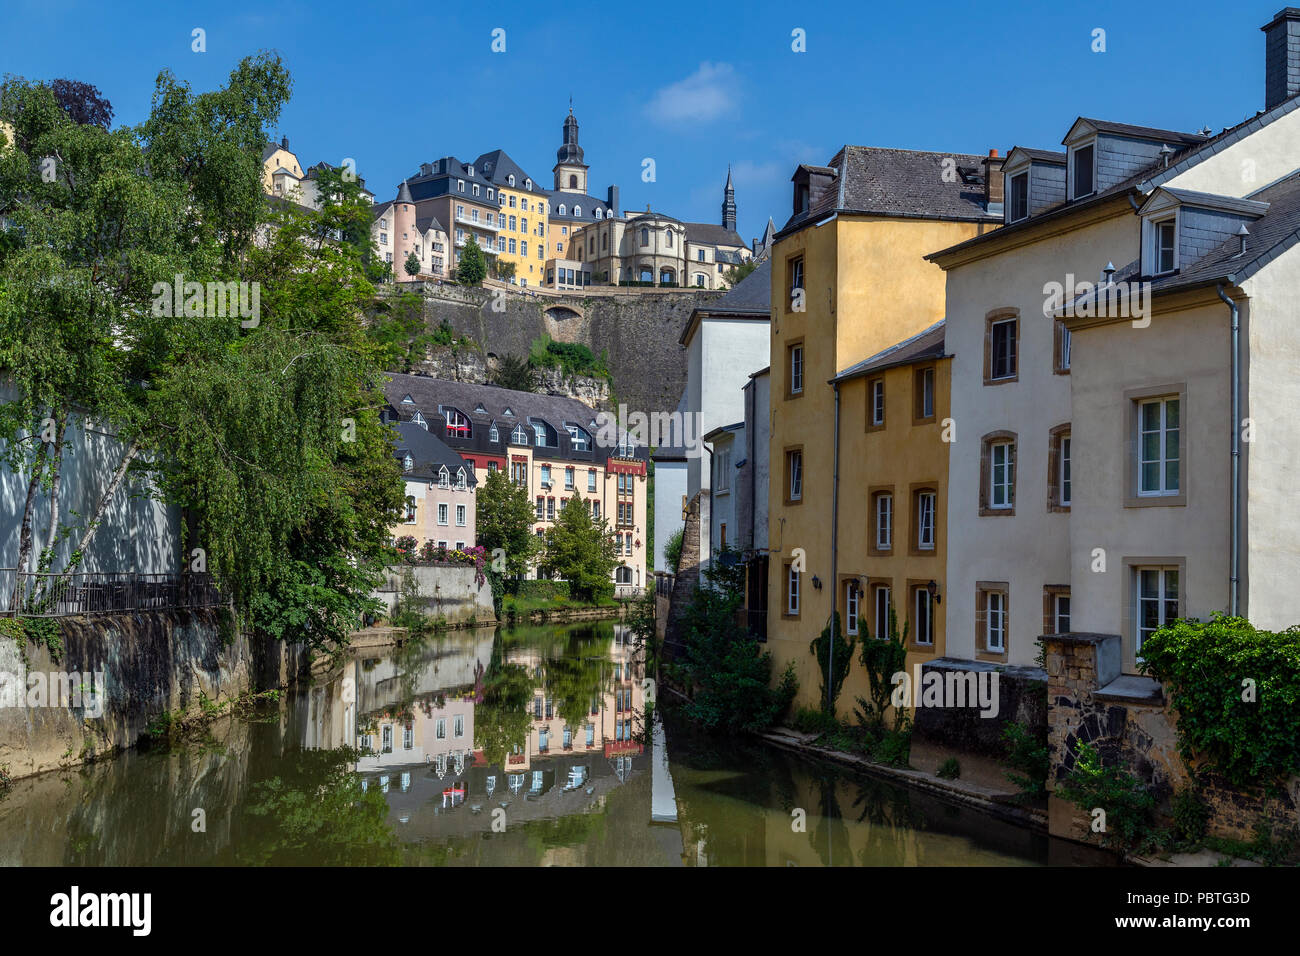 Luxembourg City - Ville de Luxembourg. The walls of the old town viewed from the Grund area of the city. Stock Photo